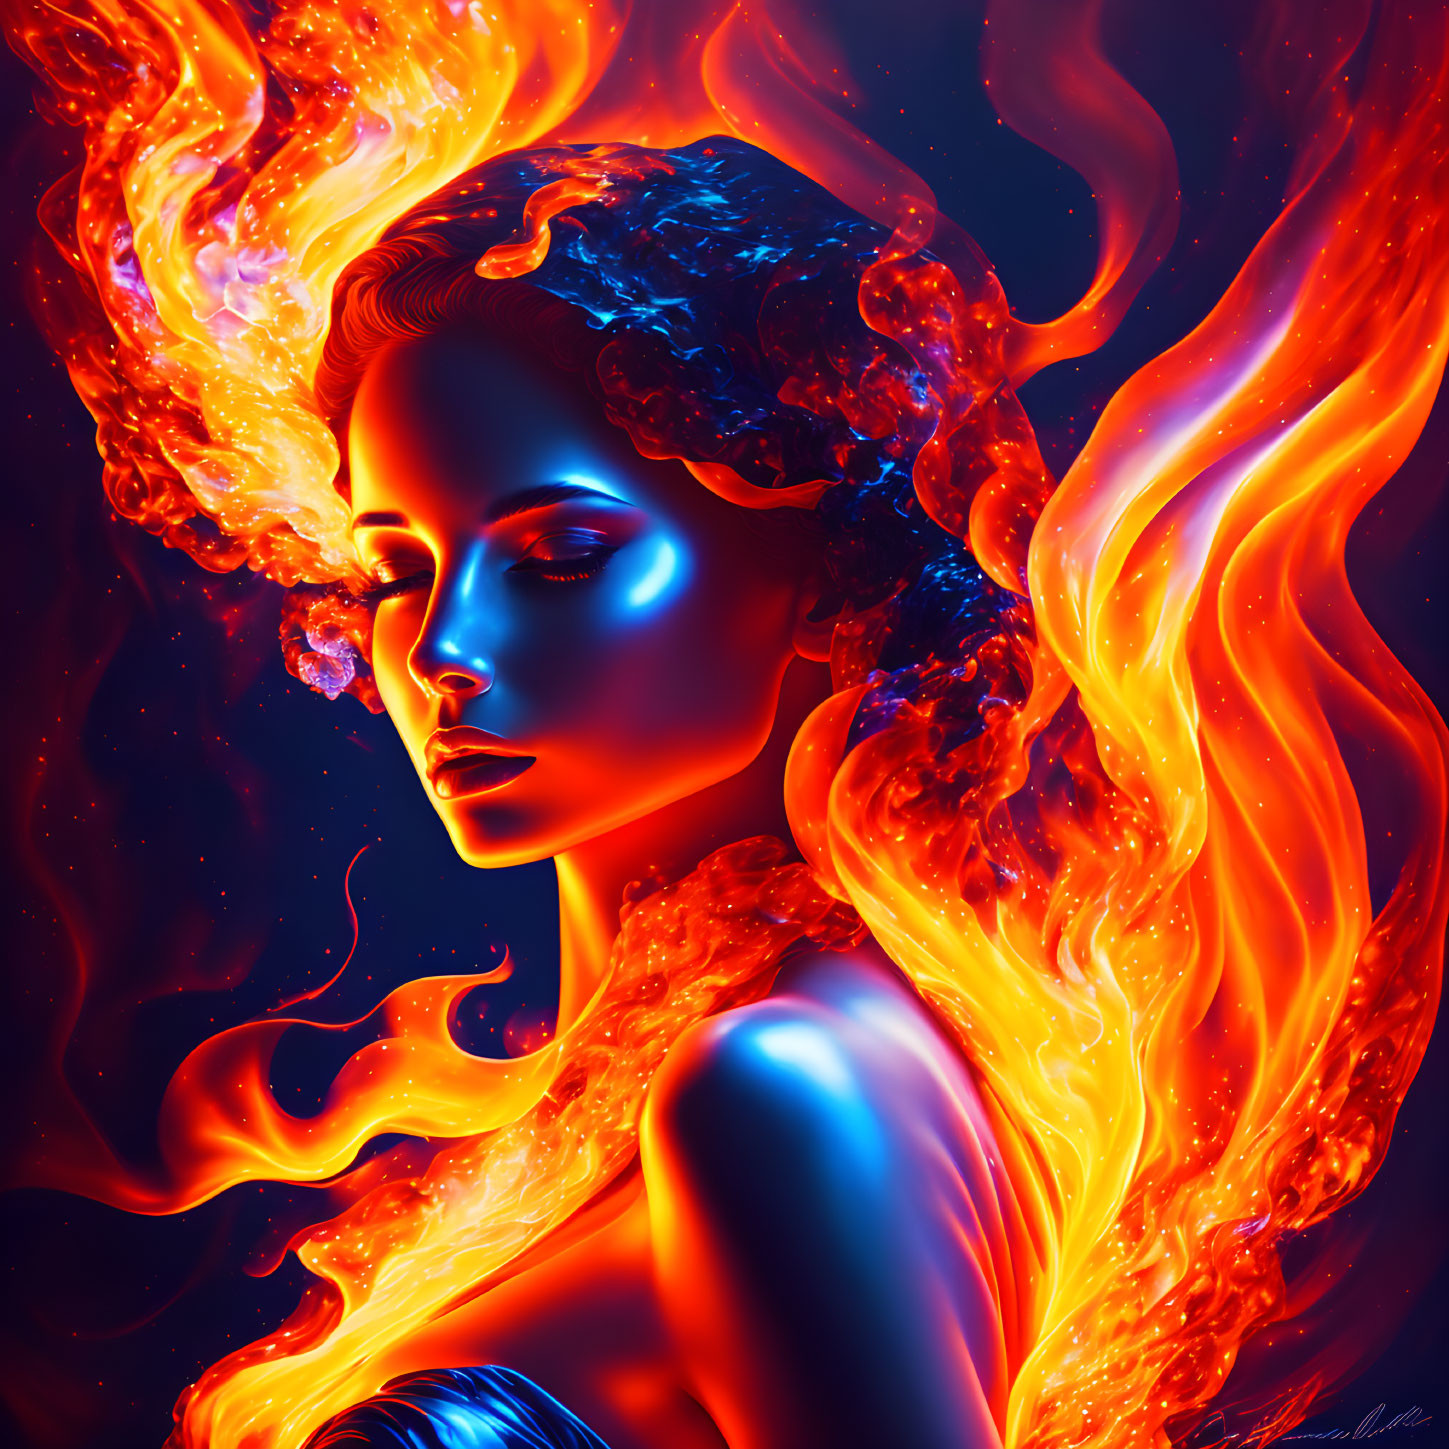 A girl in the arms of a flame